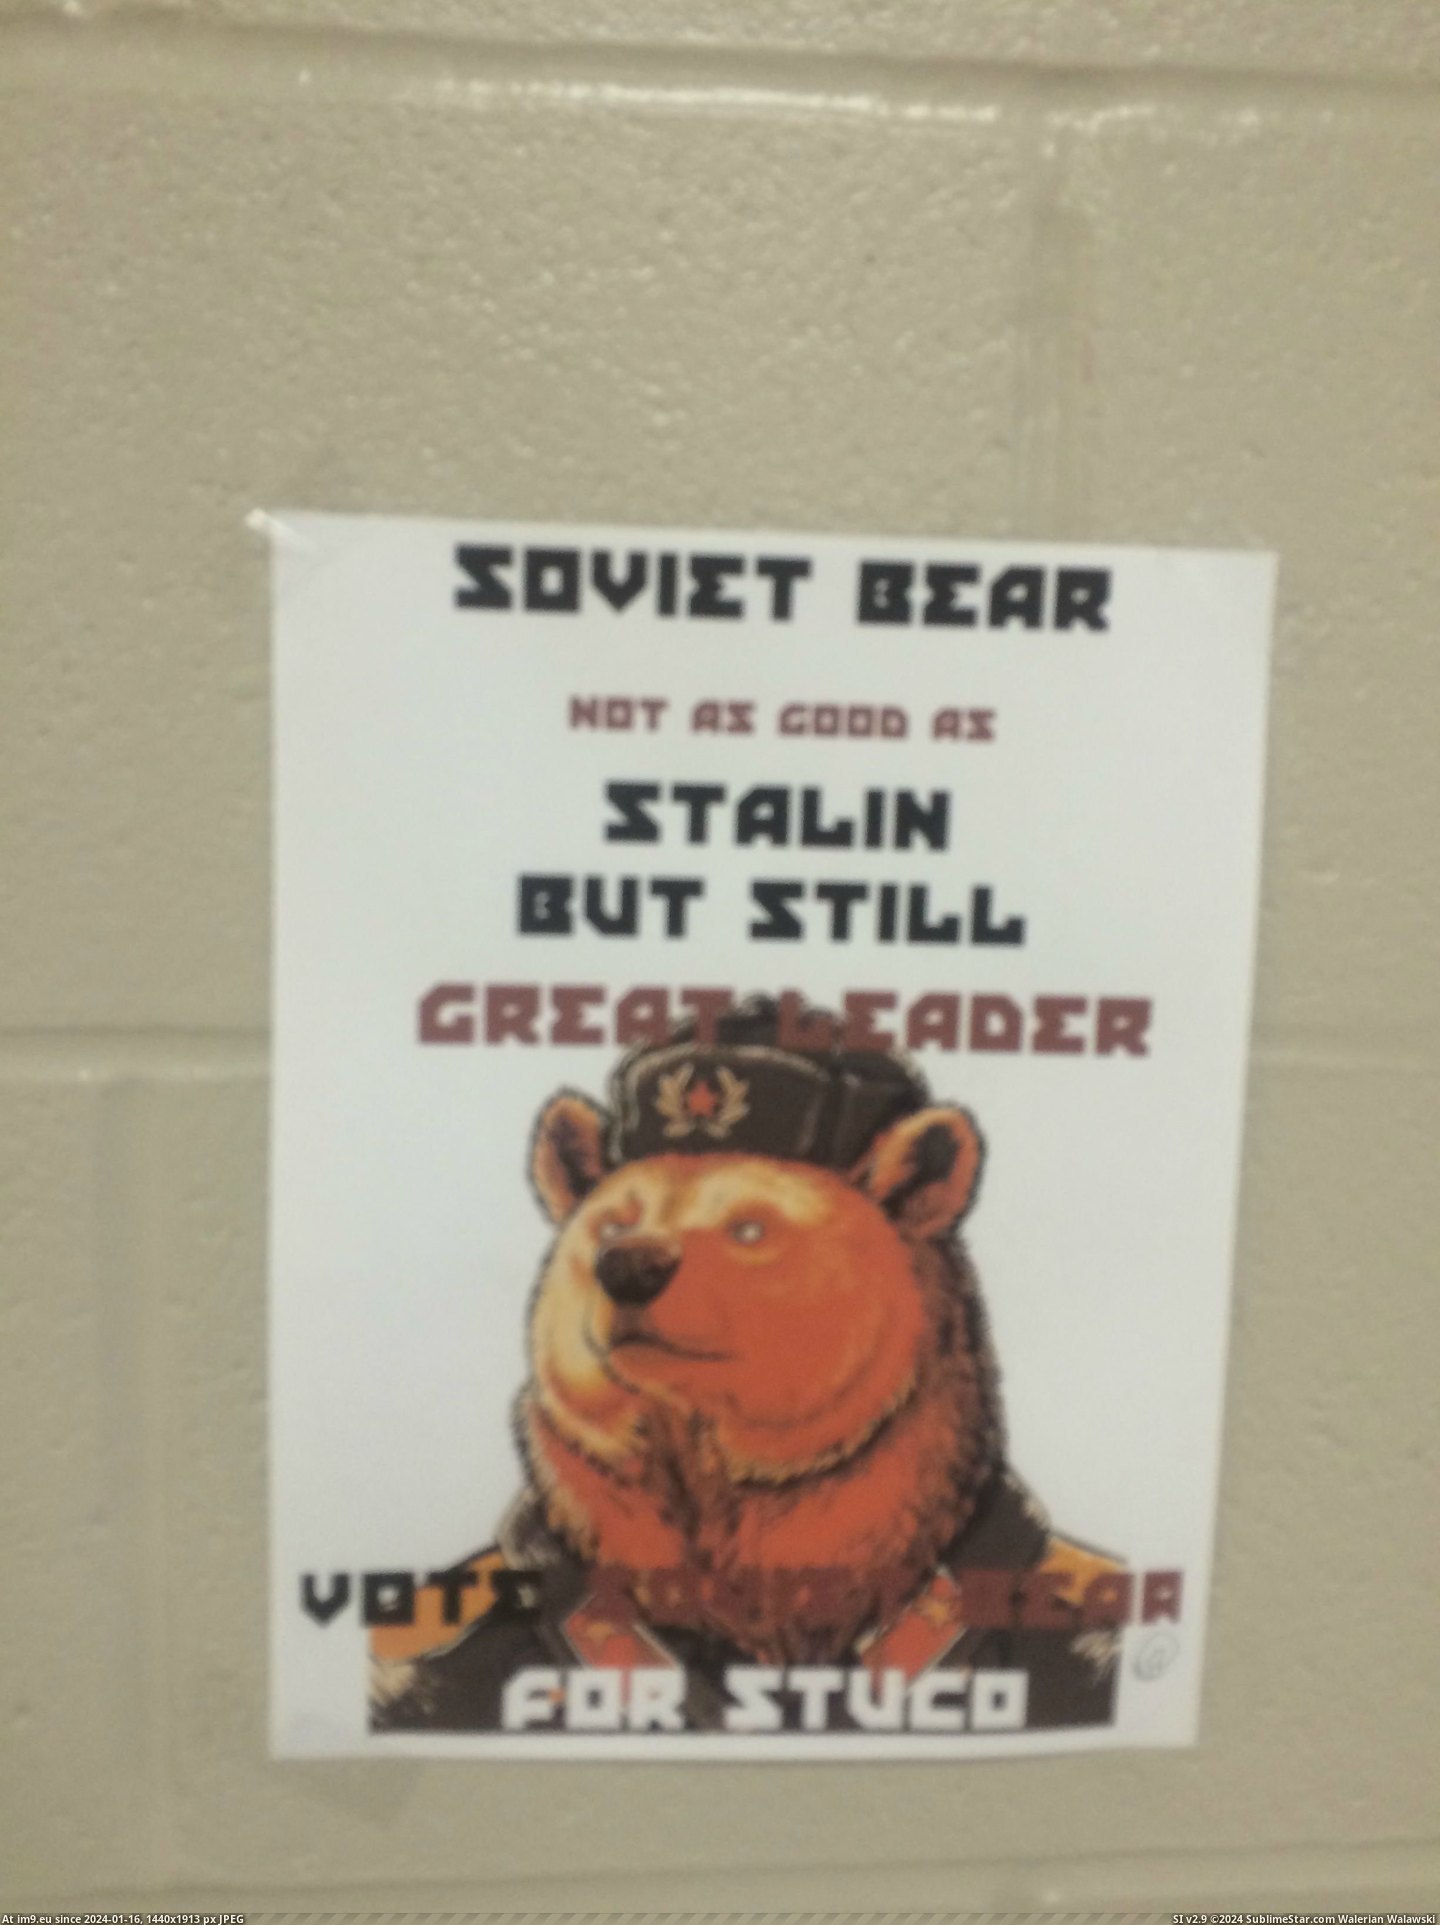 #Funny #School #Decided #Holding #Soviet #Council #Elections #Bear #Student #Run [Funny] So my school is holding elections for student council... and someone has decided to run as Soviet Bear 13 Pic. (Изображение из альбом My r/FUNNY favs))